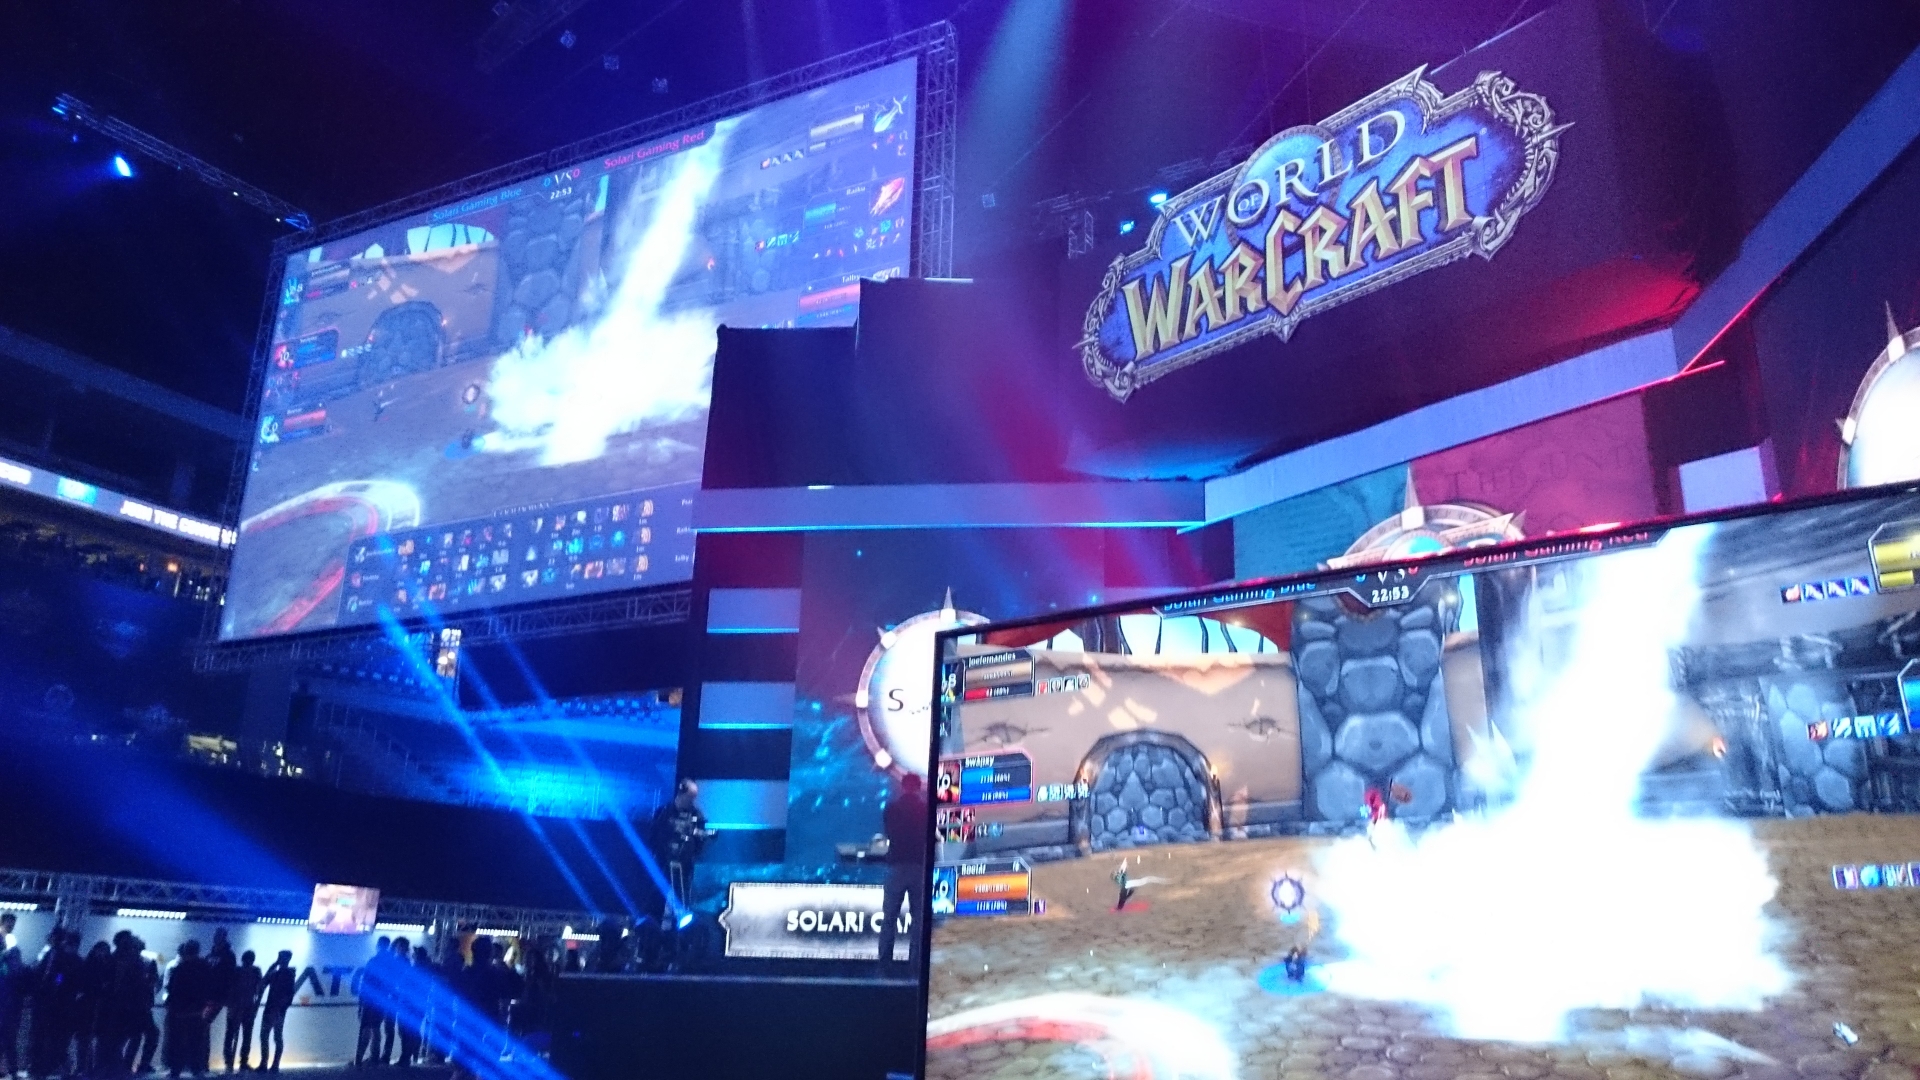 Road to BlizzCon 2015